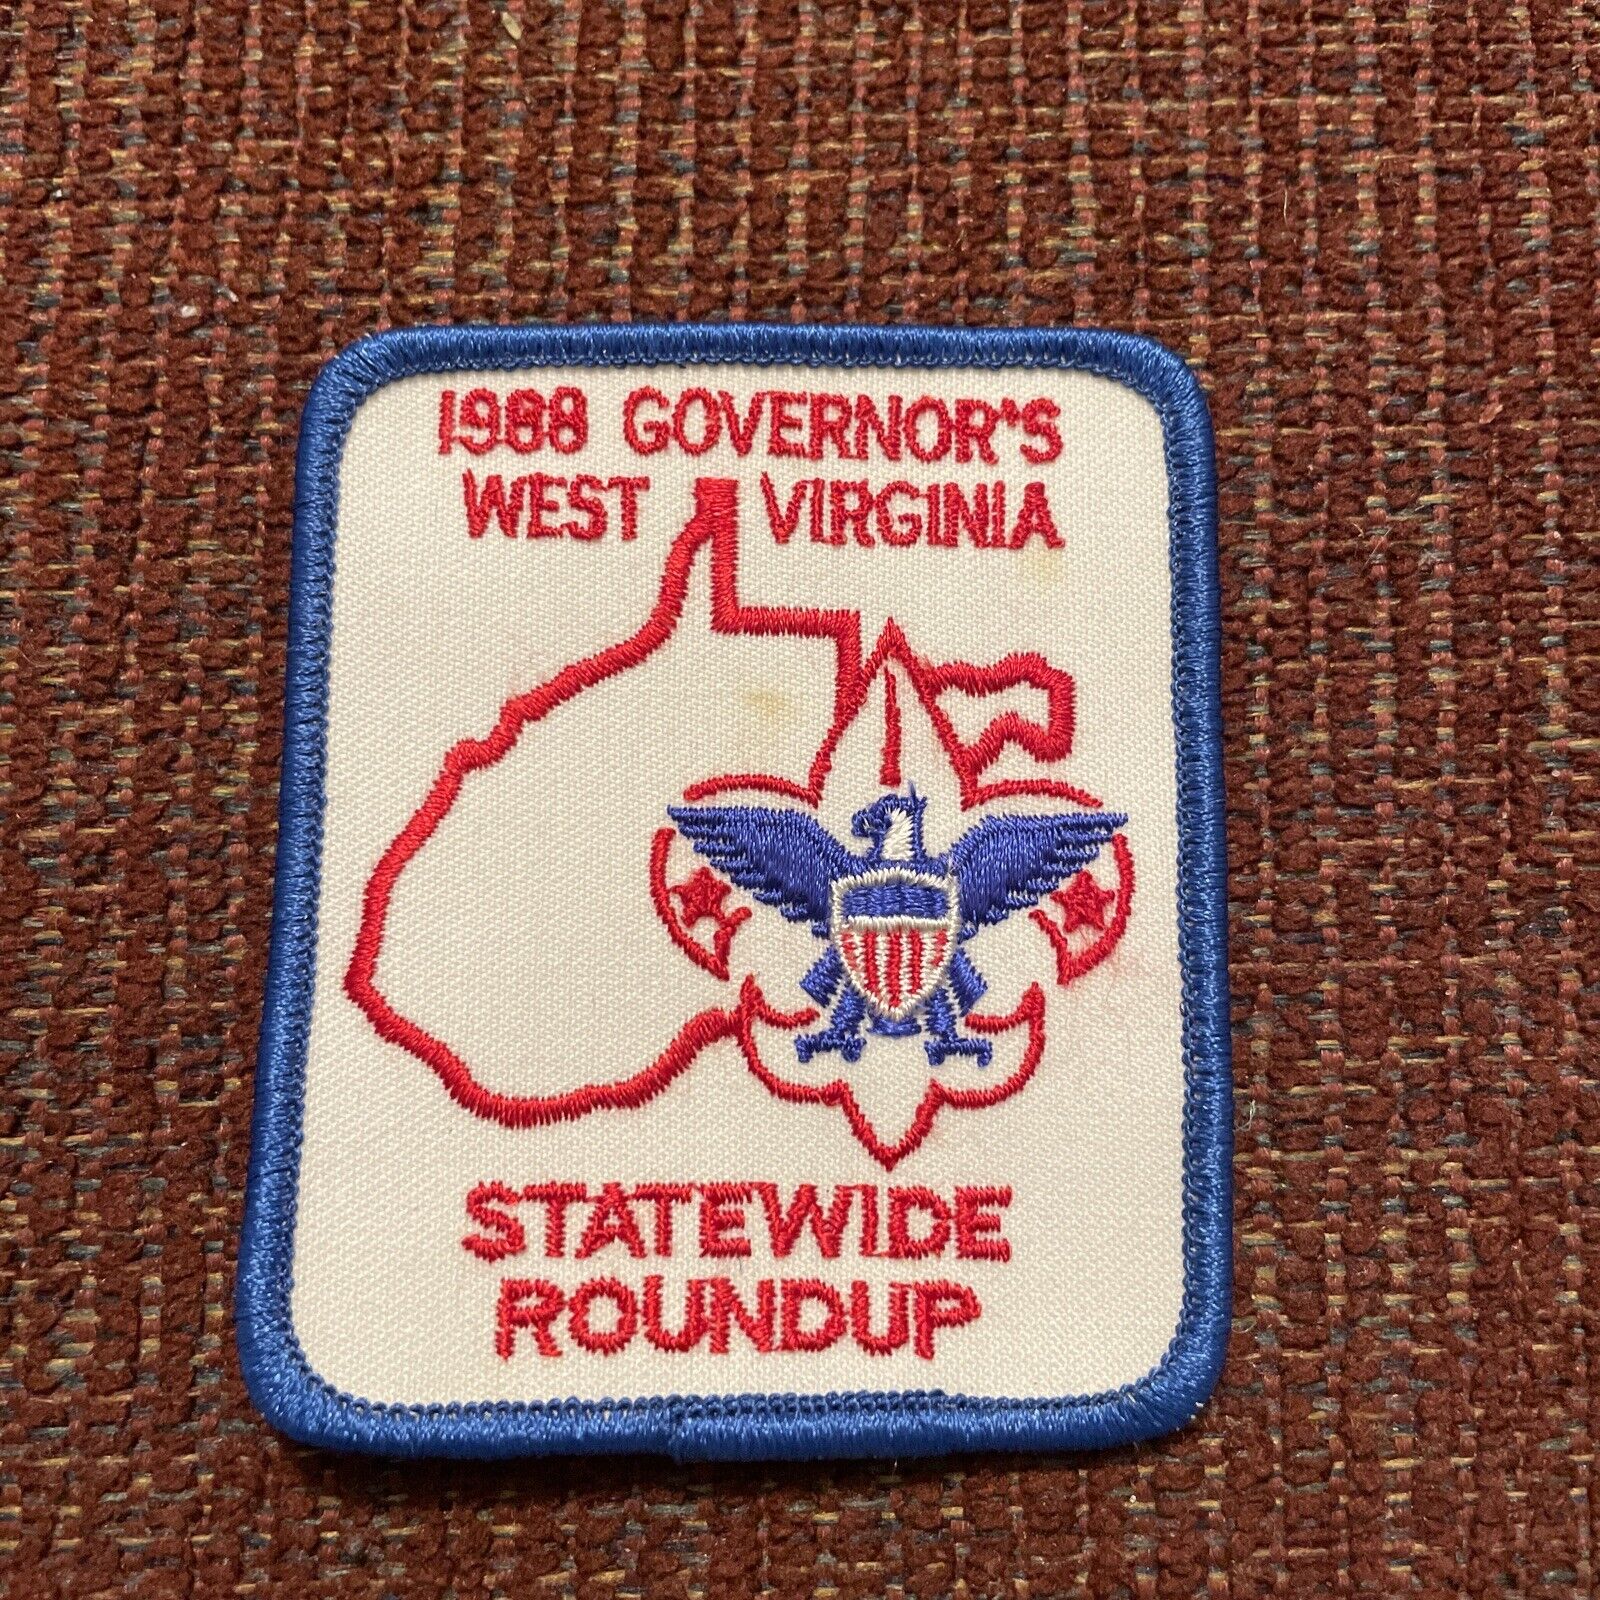 (b42) Boy Scouts-  1988 Governor\'s West Virginia Statewide Roundup patch